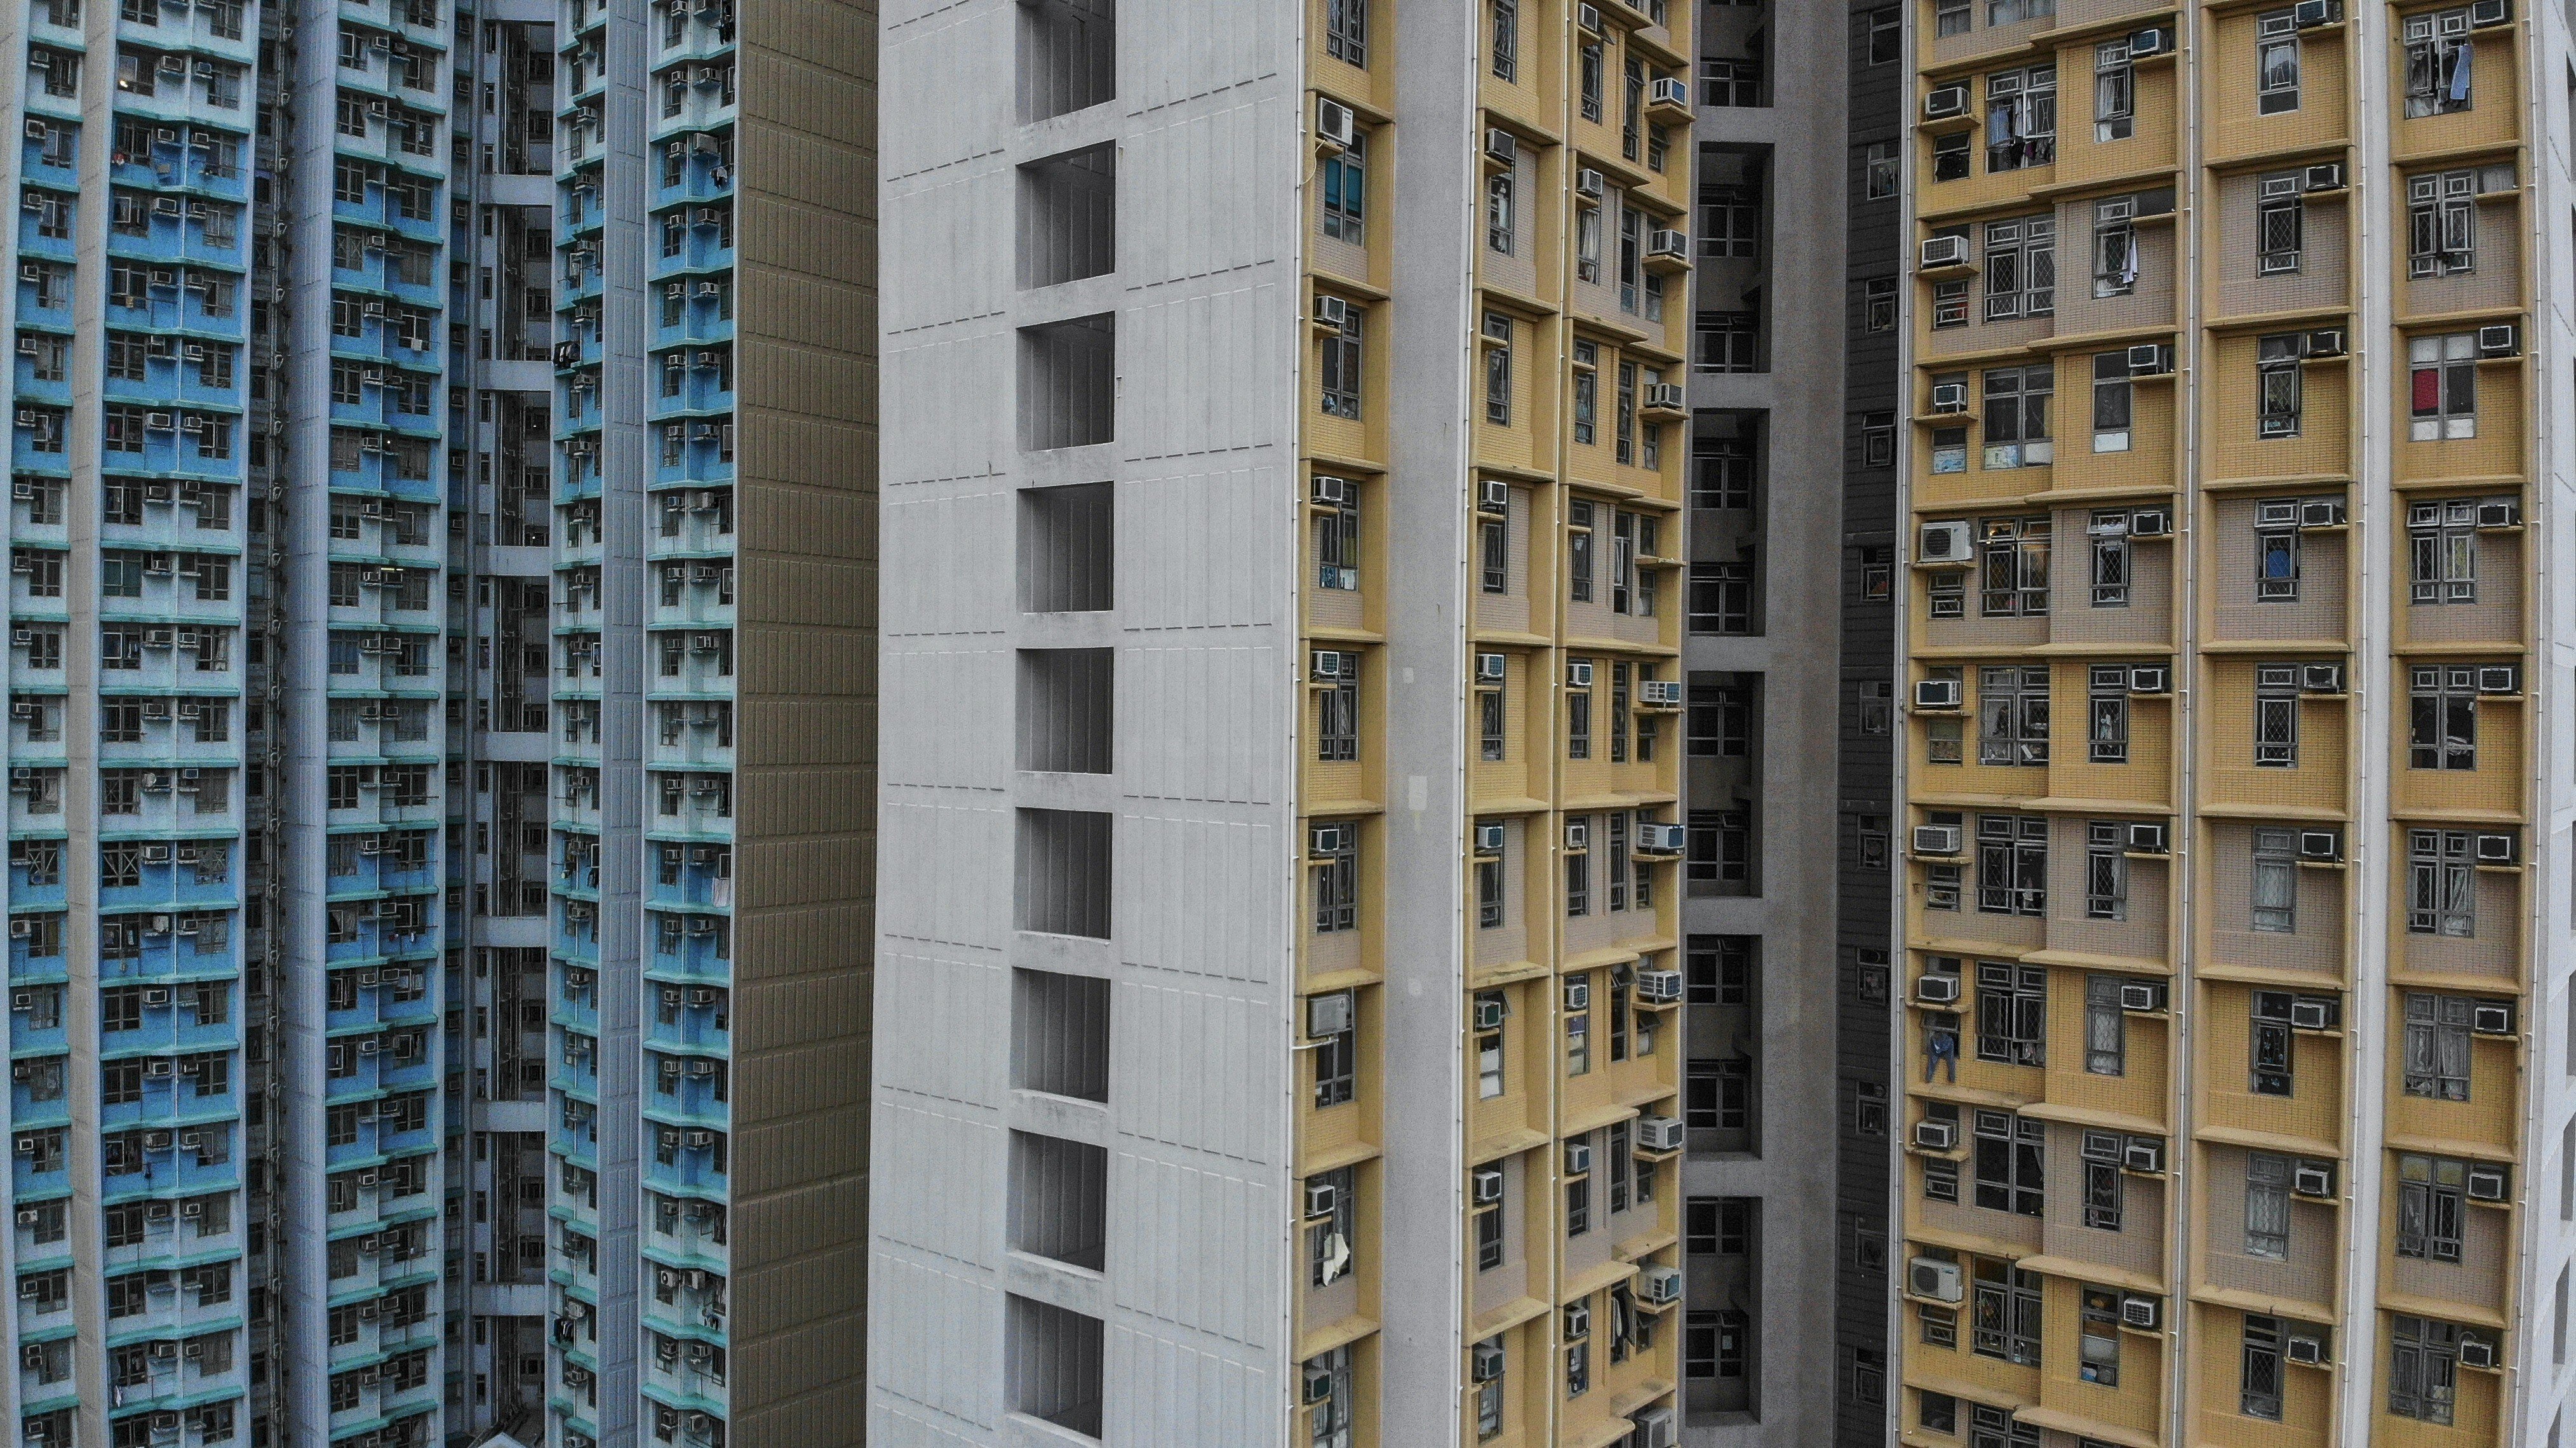 A public housing estate (left) stands next to Home Ownership Scheme housing in Shau Kei Wan in January 2019. Photo: Martin Chan